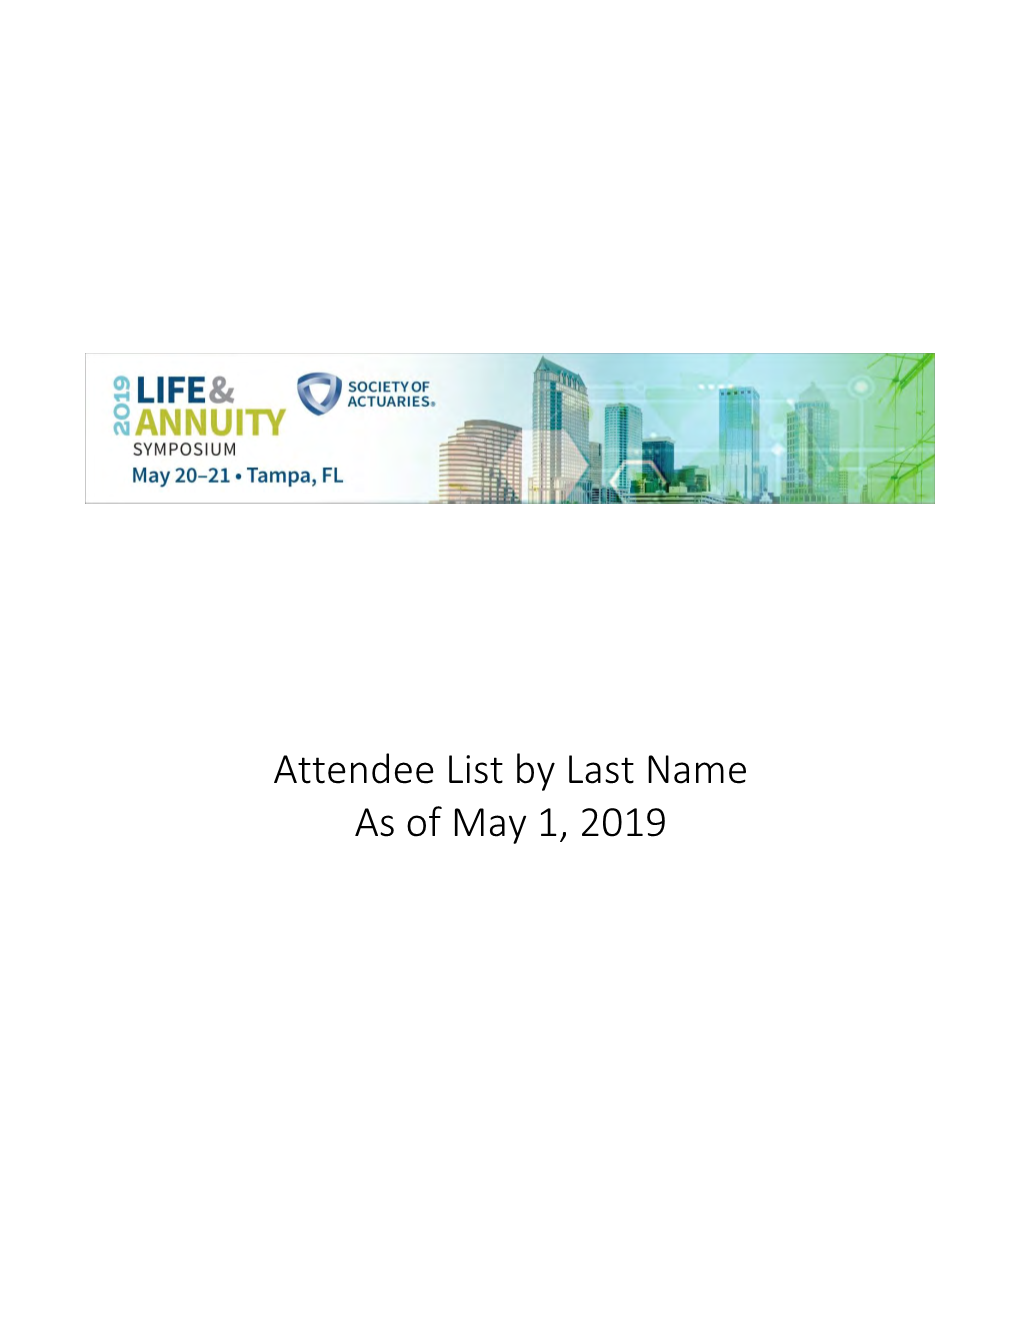 Attendee List by Last Name As of May 1, 2019 Sarah Abigail Philip Adams Scott Alexander Ironbound Consulting Group Munich Re Genesis Development Group, Inc